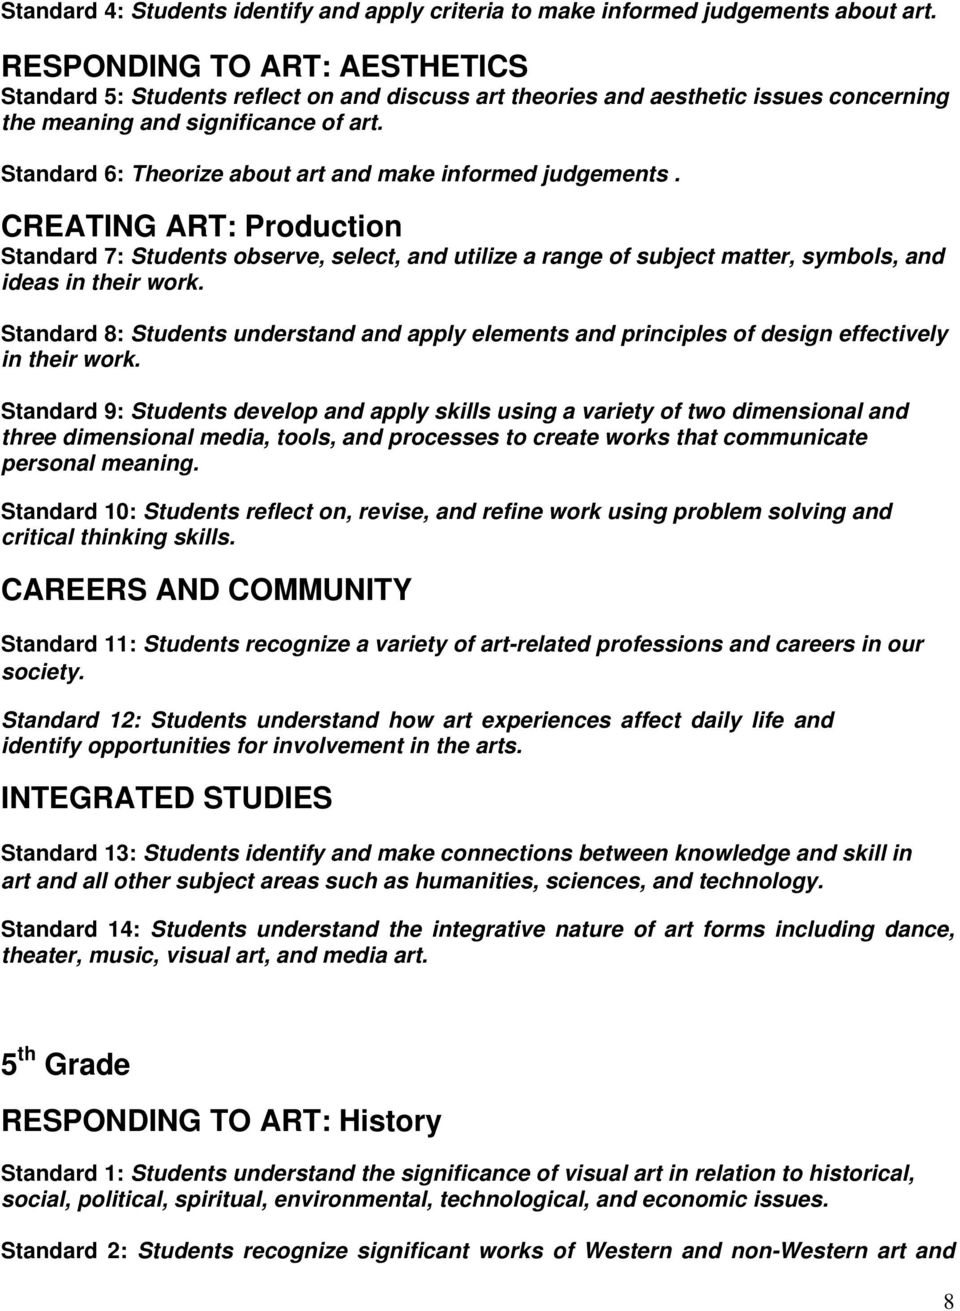 Standard 8: Students understand and apply elements and principles of design effectively in their work.